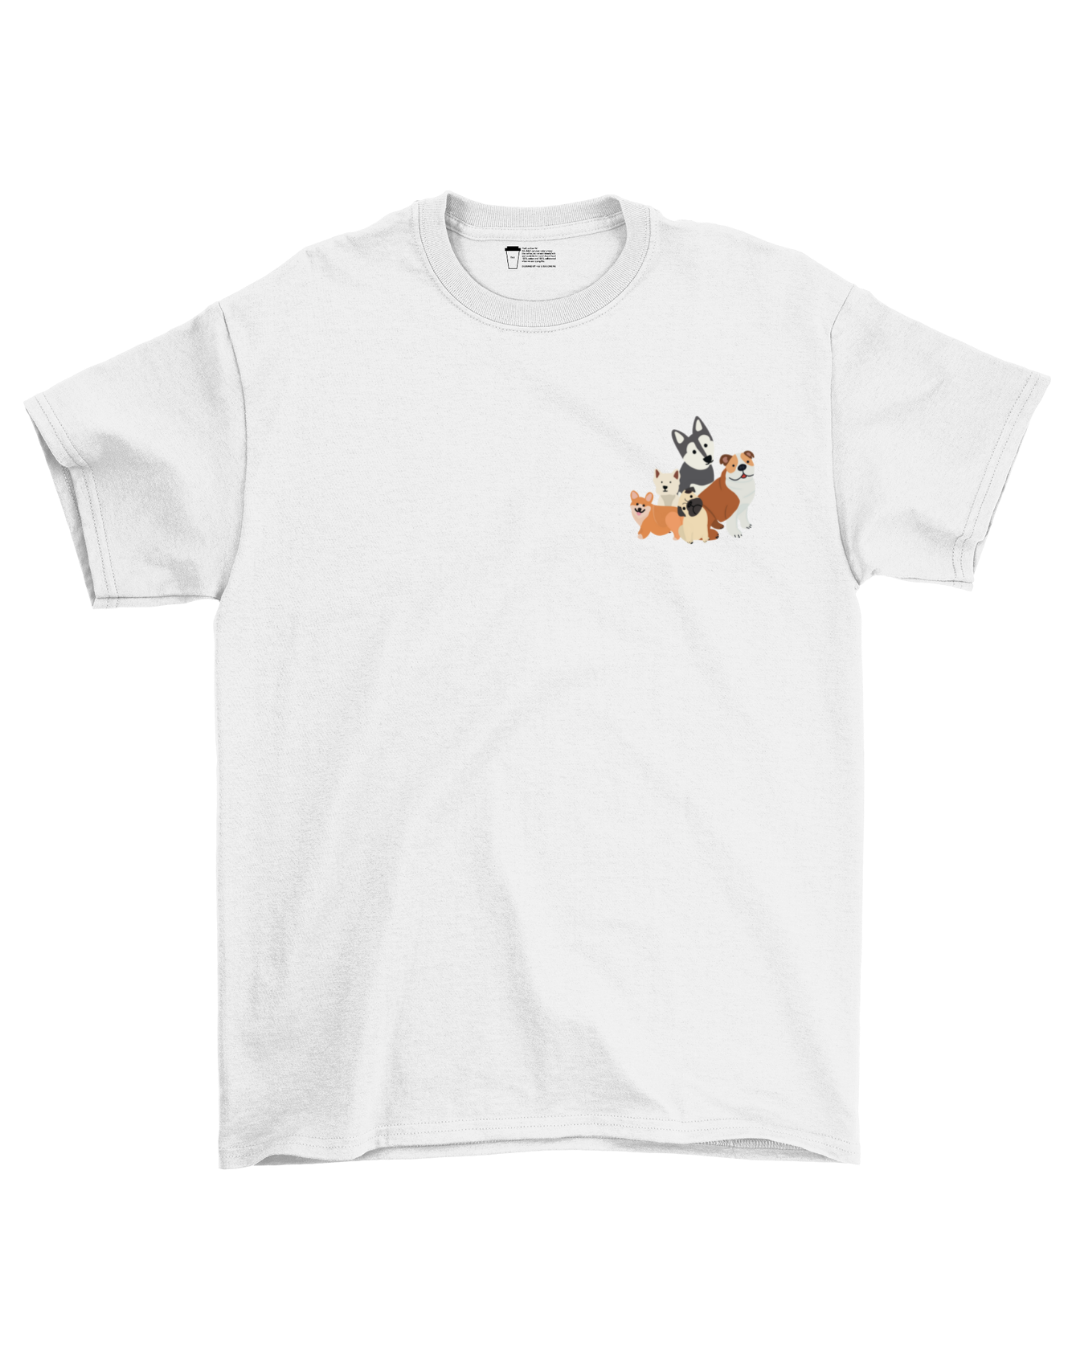 Hug The Dogs Oversized Tee in White